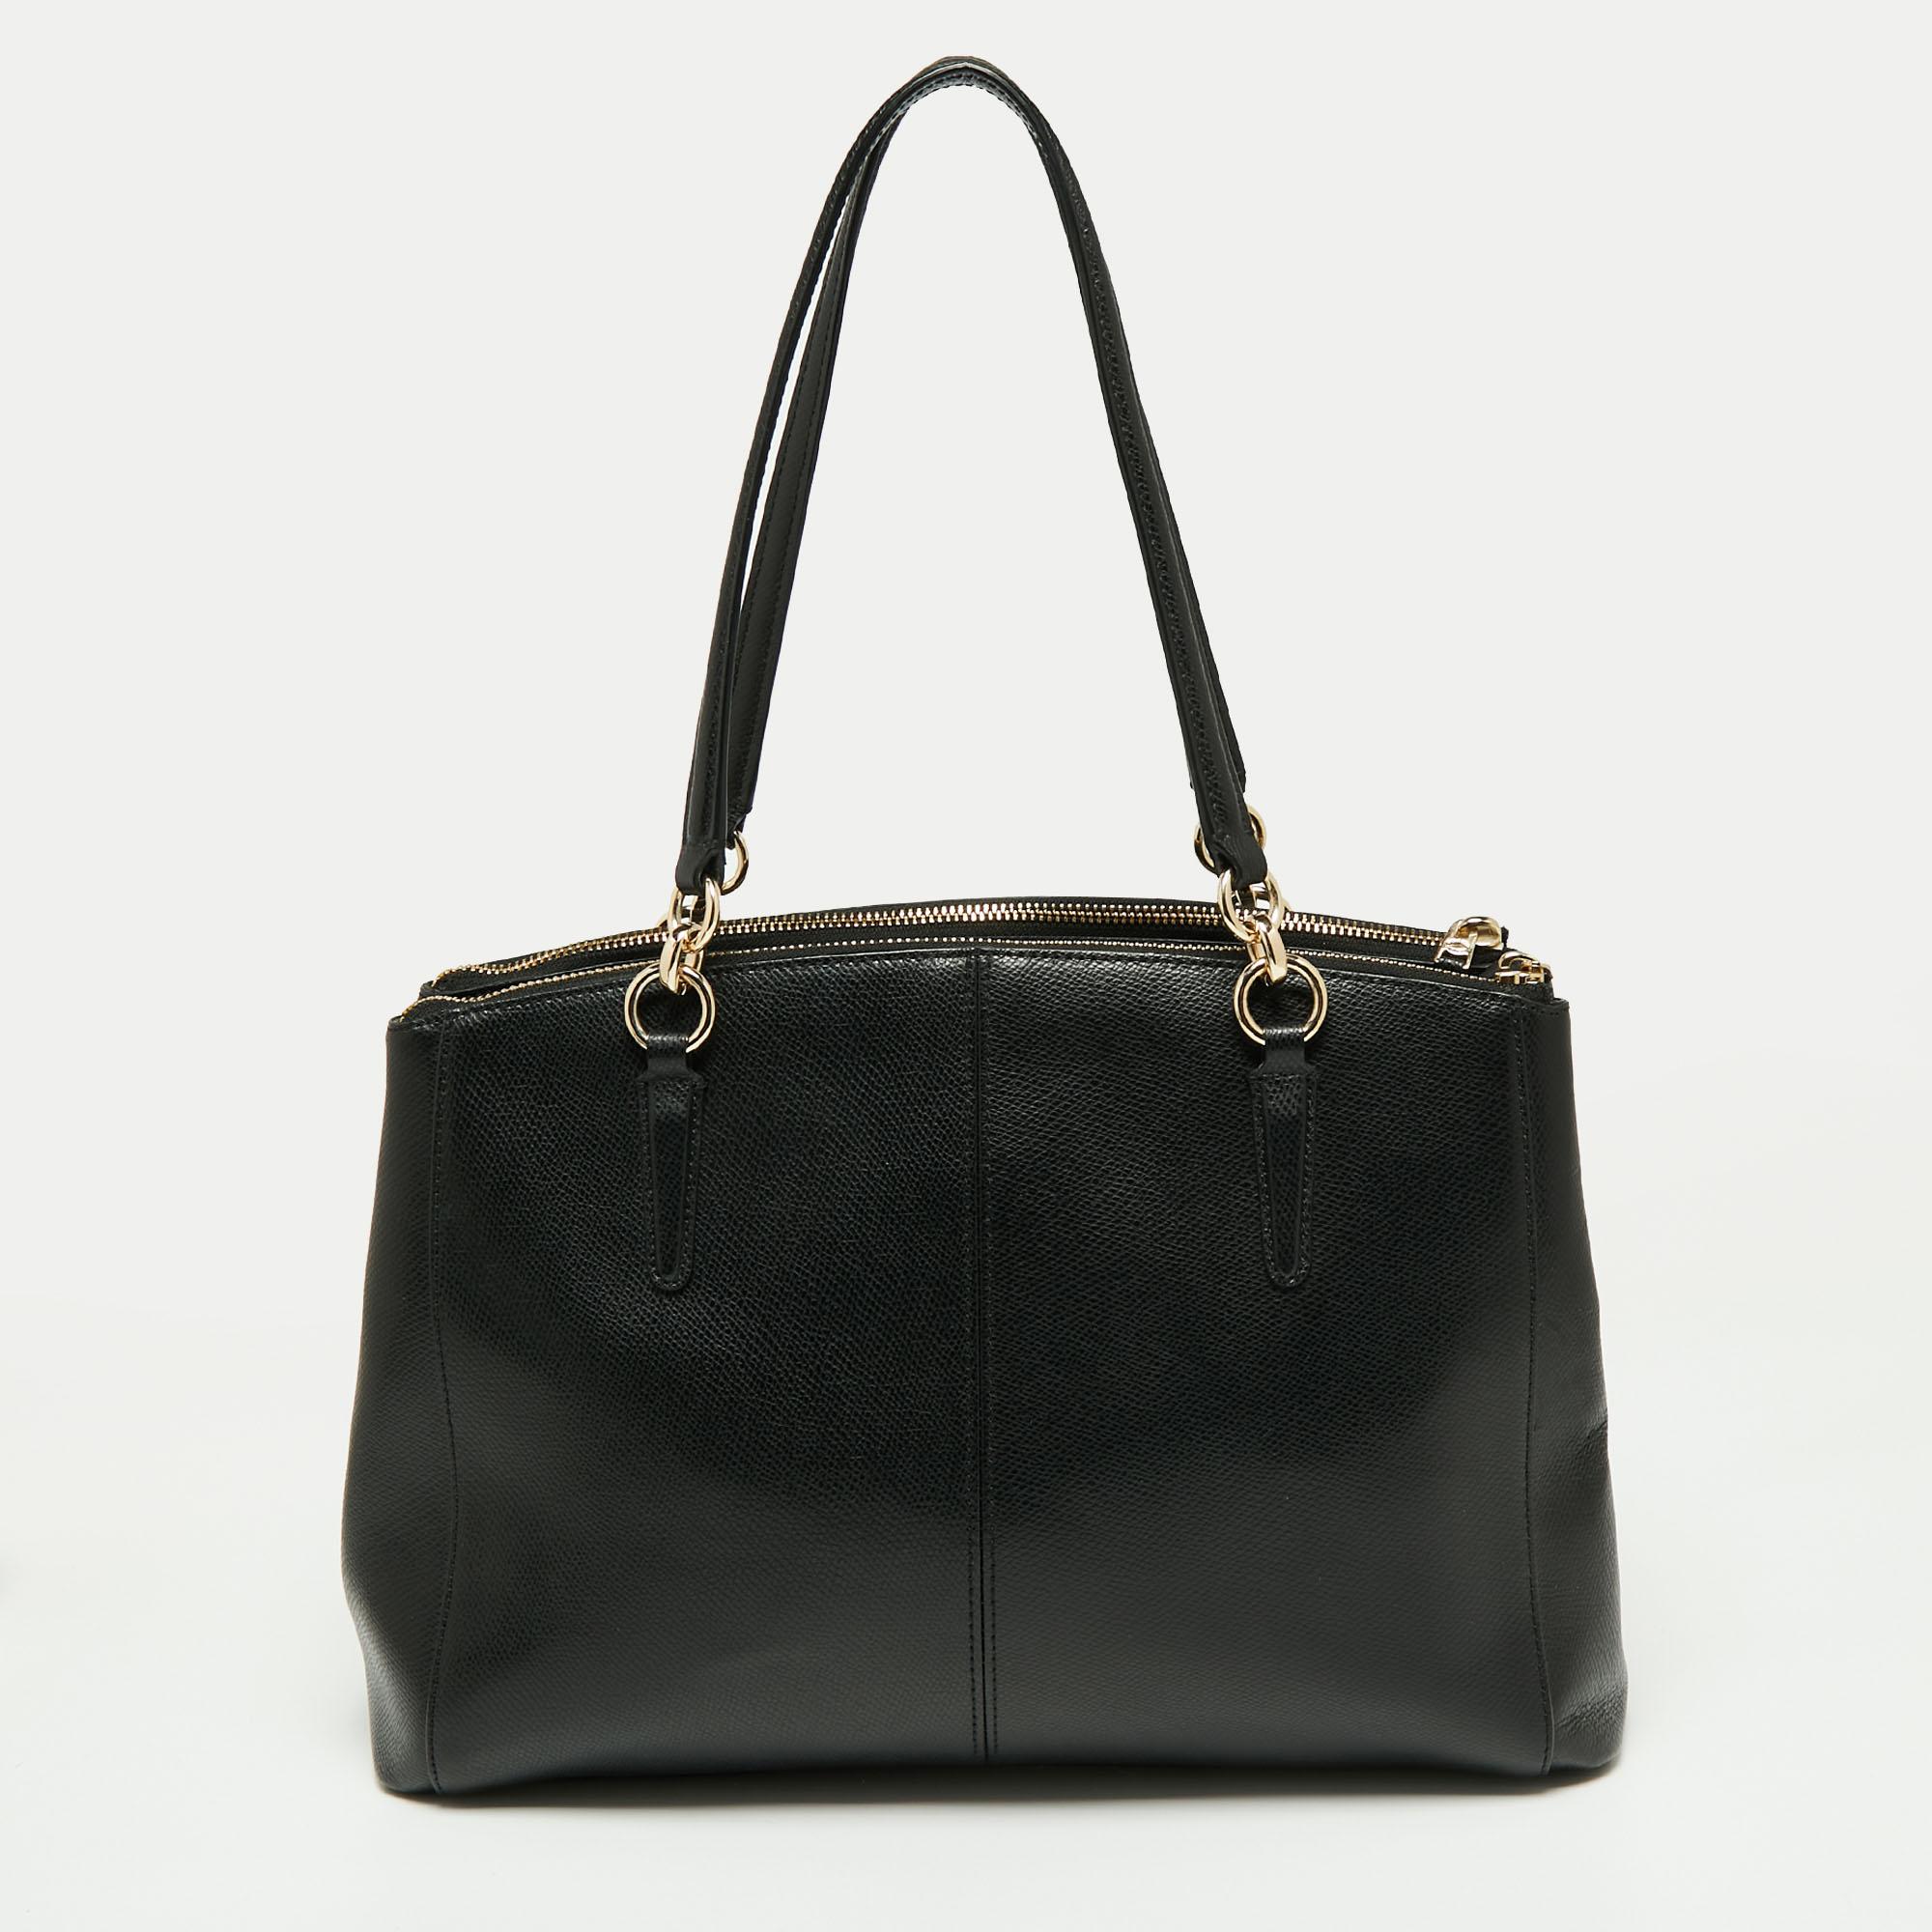 This beautiful Christie bag from Coach is highly functional while also being charming. Crafted from leather, the bag features dual handles, a detachable shoulder strap, and gold-tone hardware. The fabric-lined interior of this black creation comes